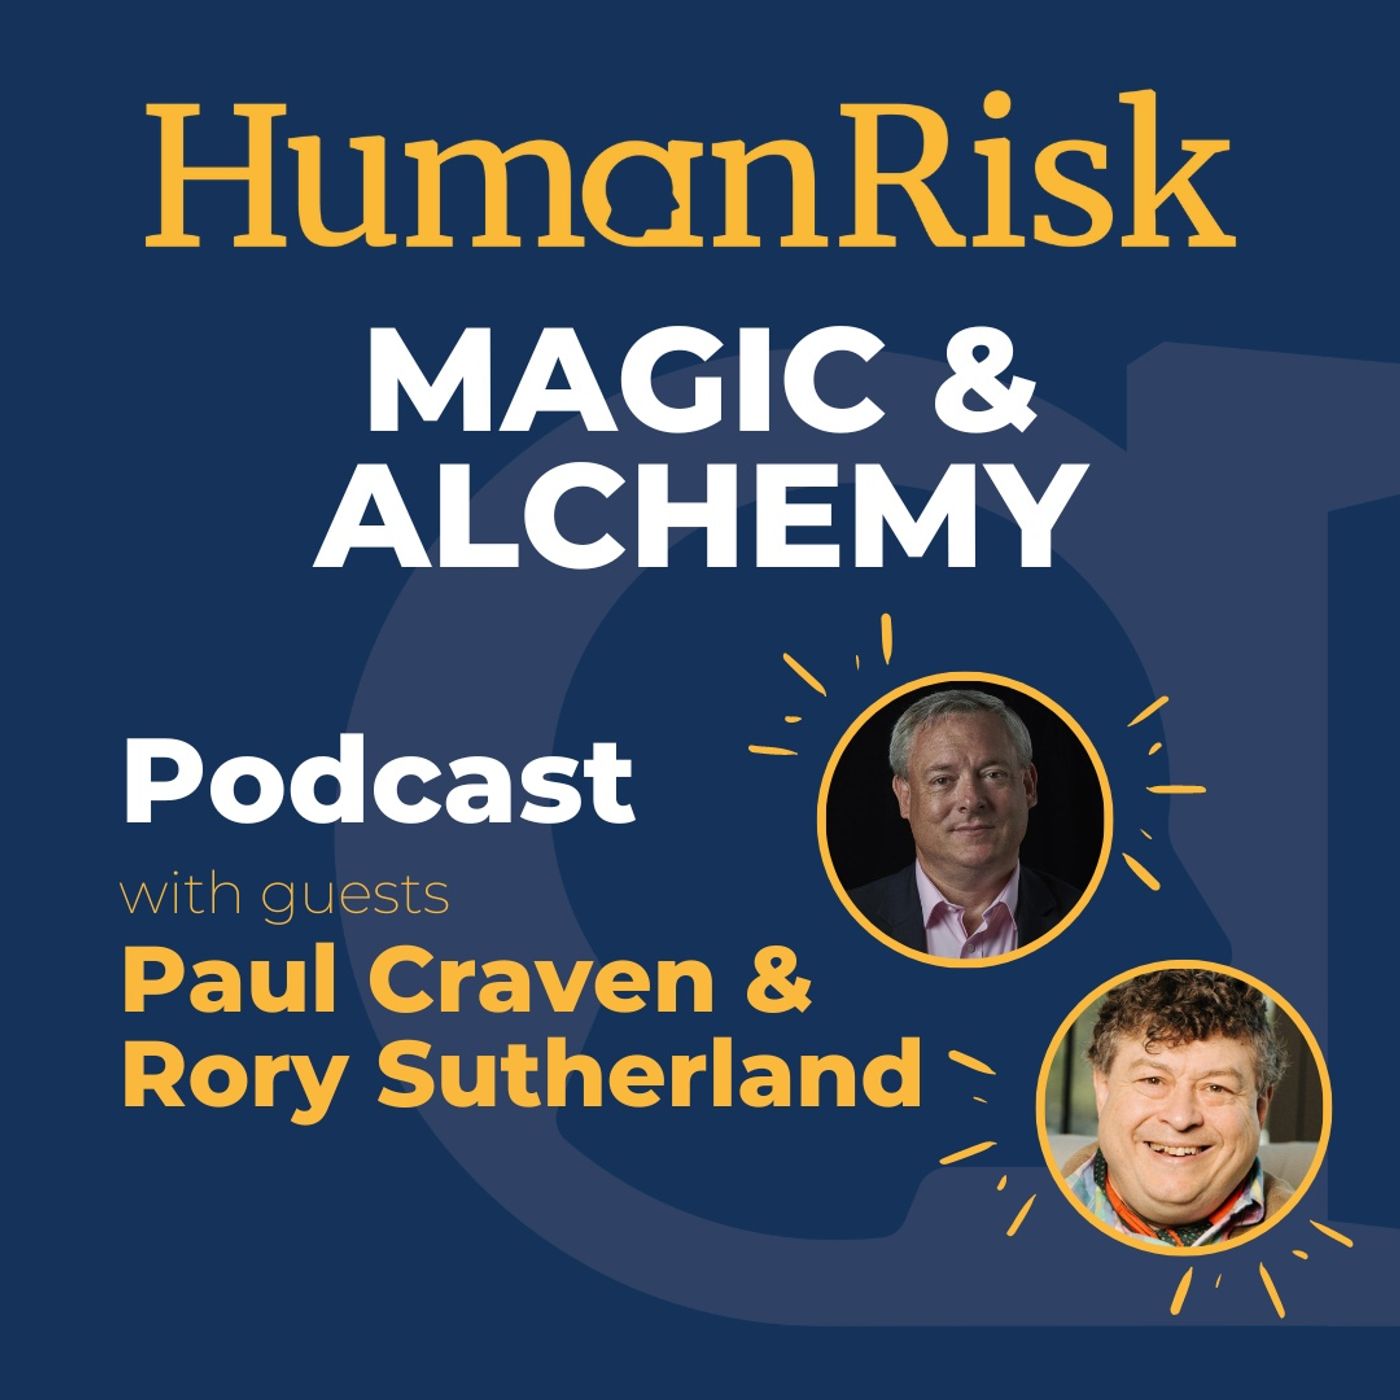 Paul Craven & Rory Sutherland on Magic & Alchemy